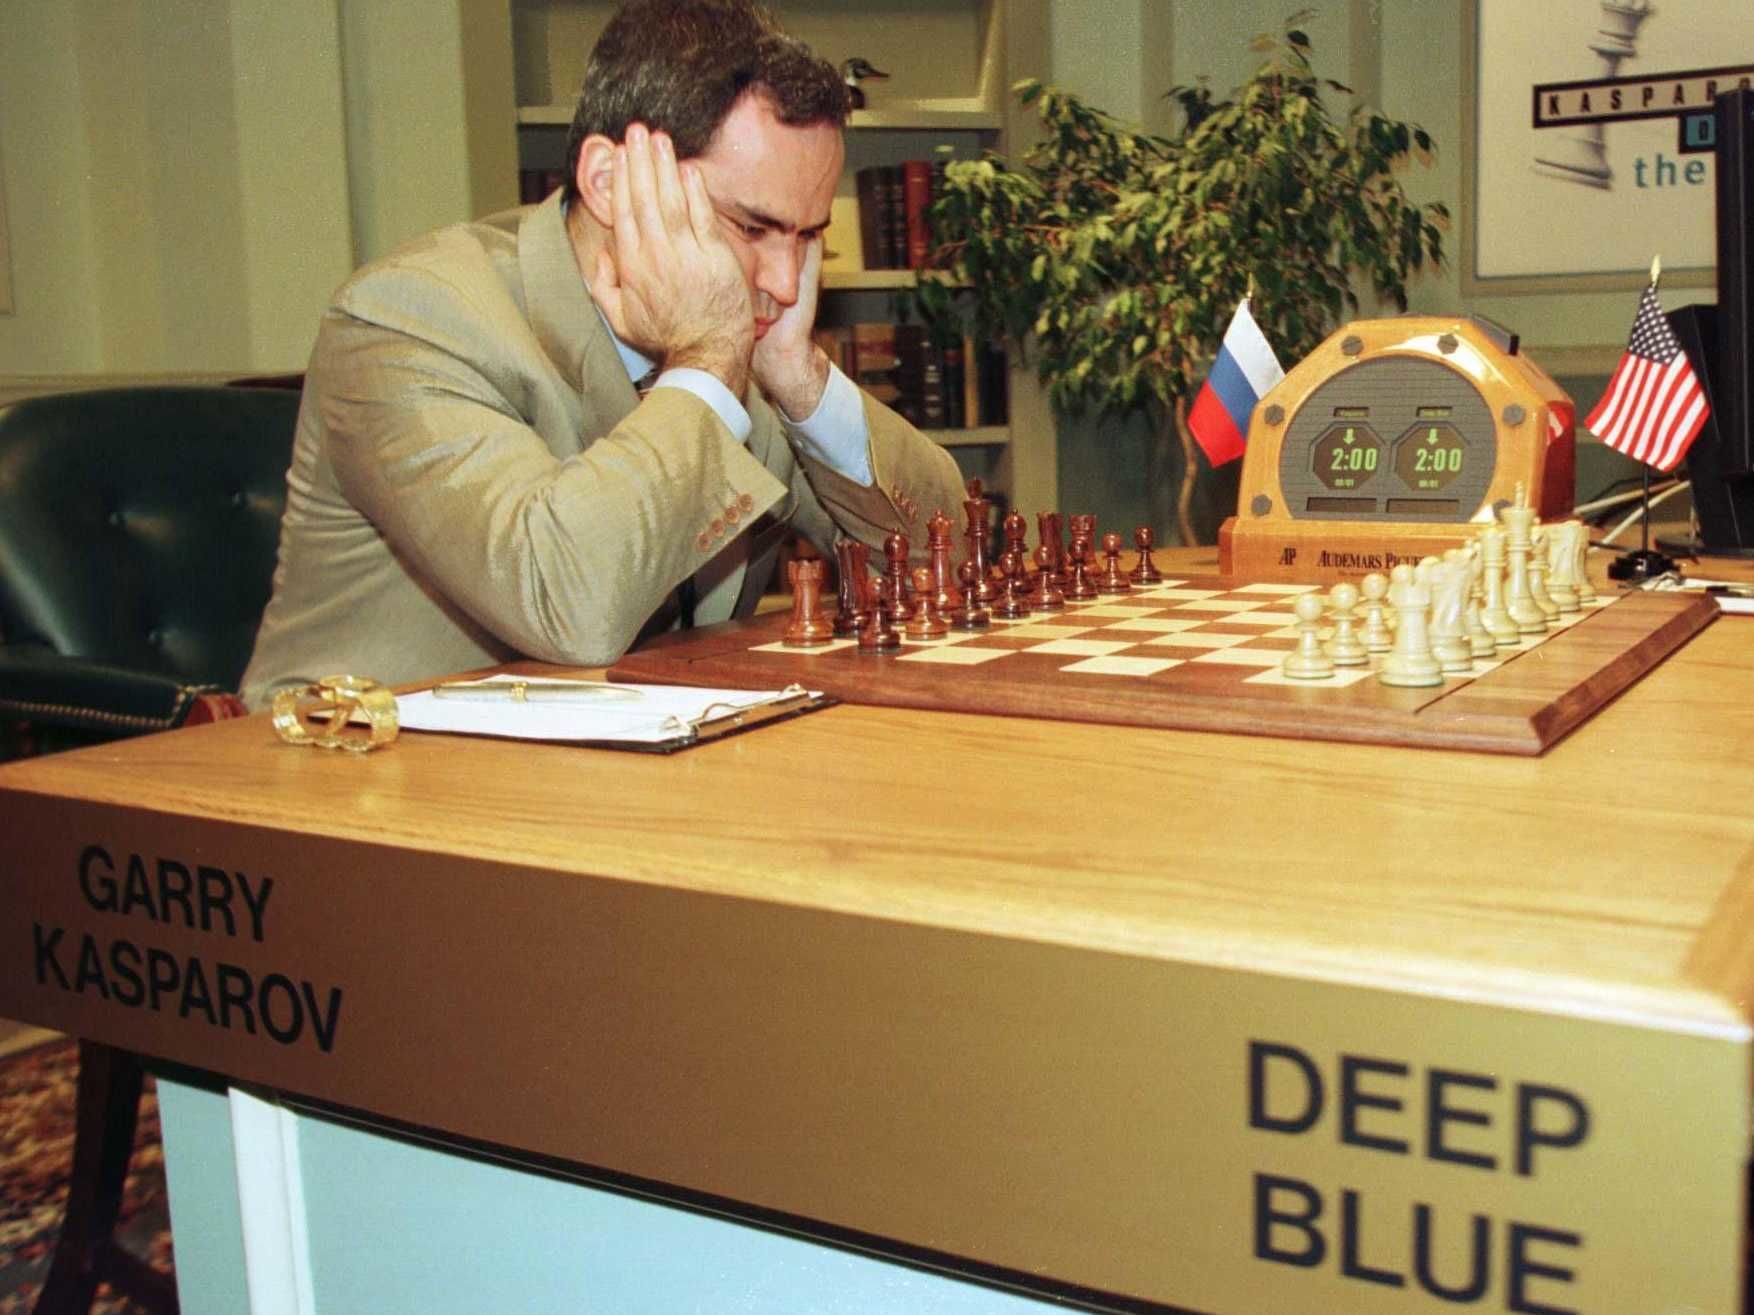 a-machine-is-about-to-do-to-cancer-treatment-what-deep-blue-did-to-garry-kasparov-in-chess.jpg